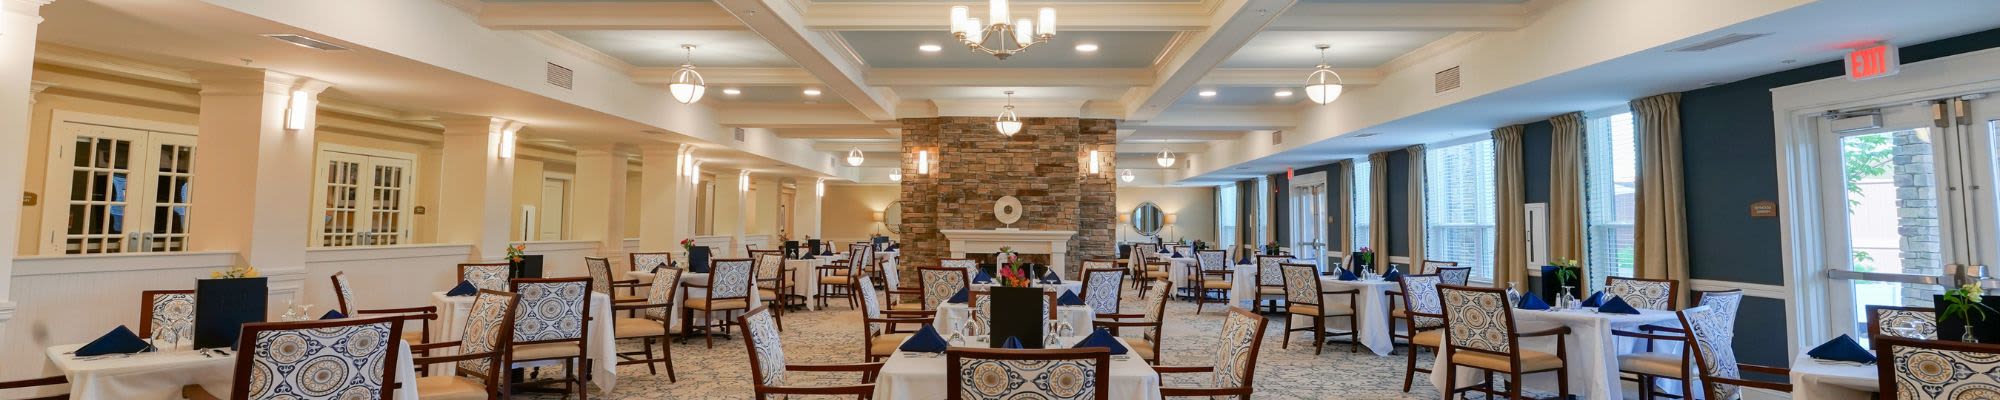 Dining at Harmony at Harbour View in Suffolk, Virginia